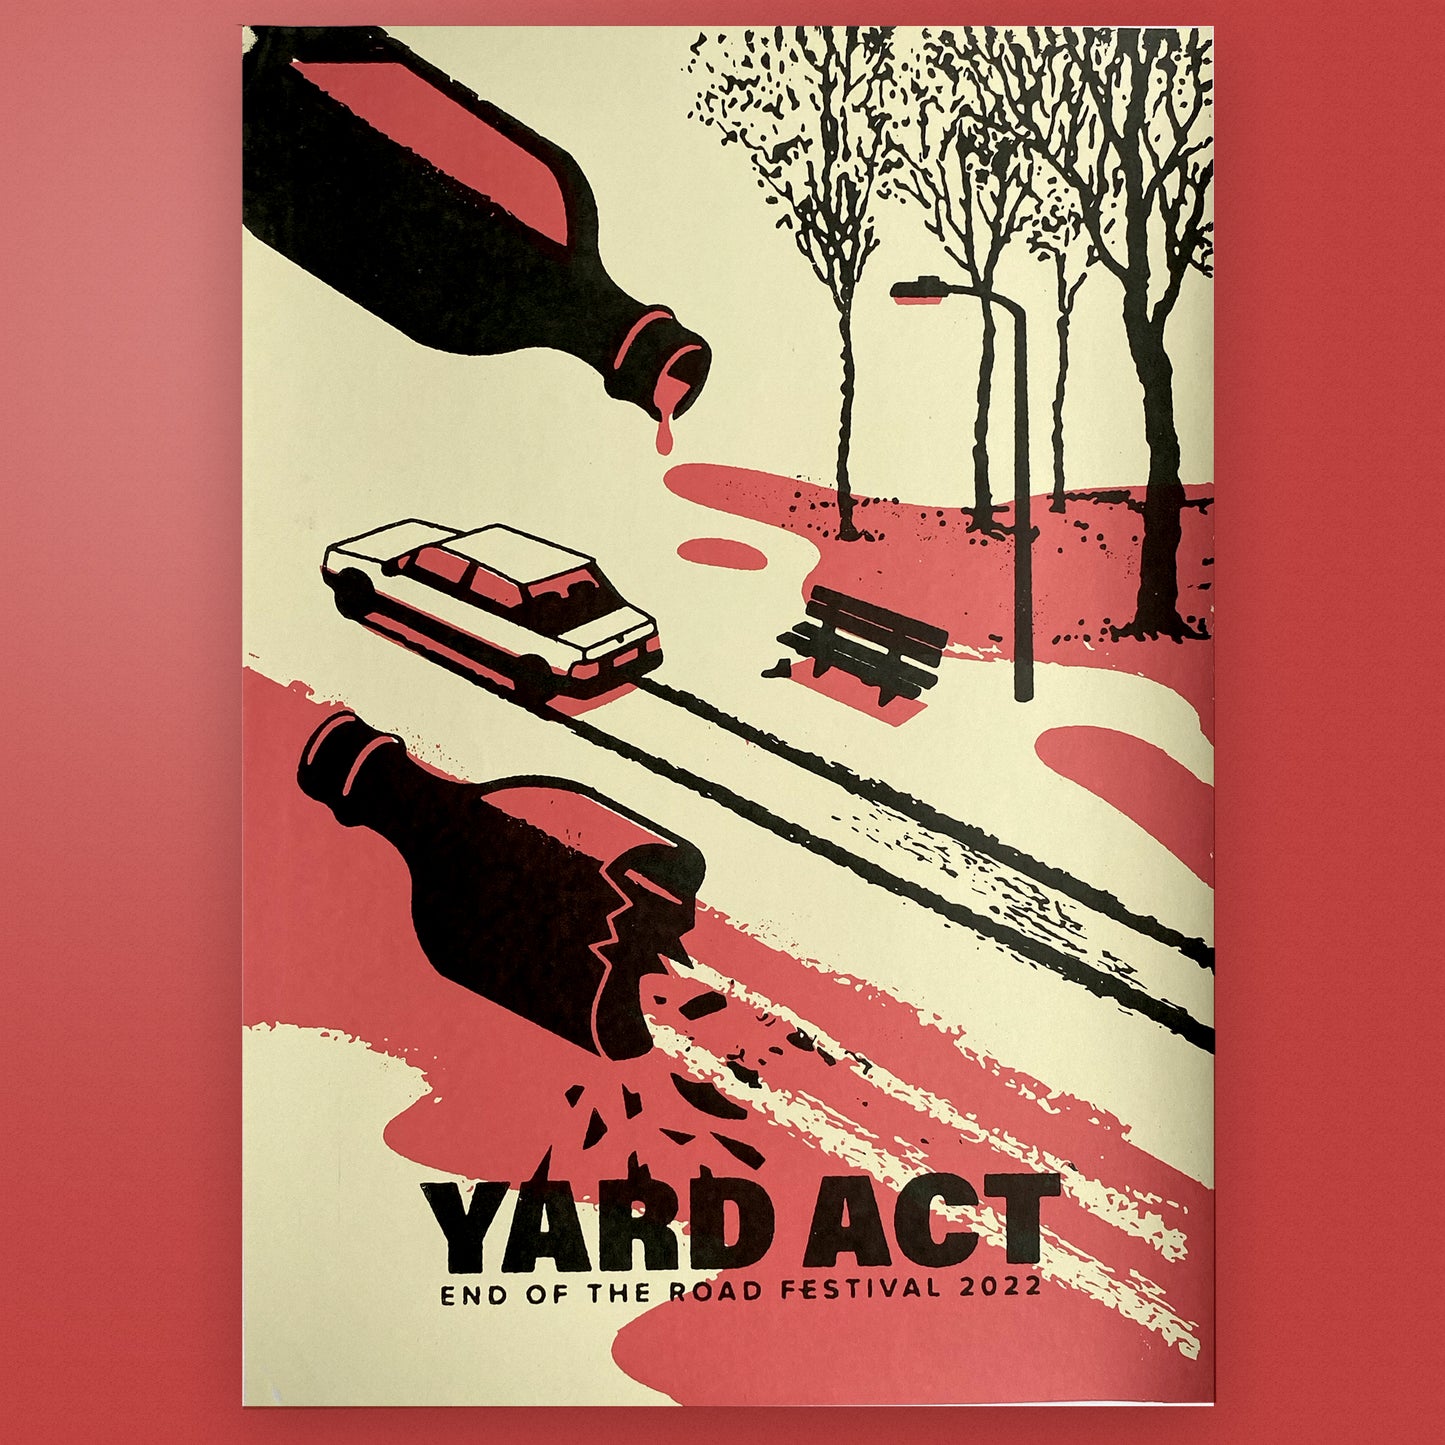 Yard Act - End of the Road 2022